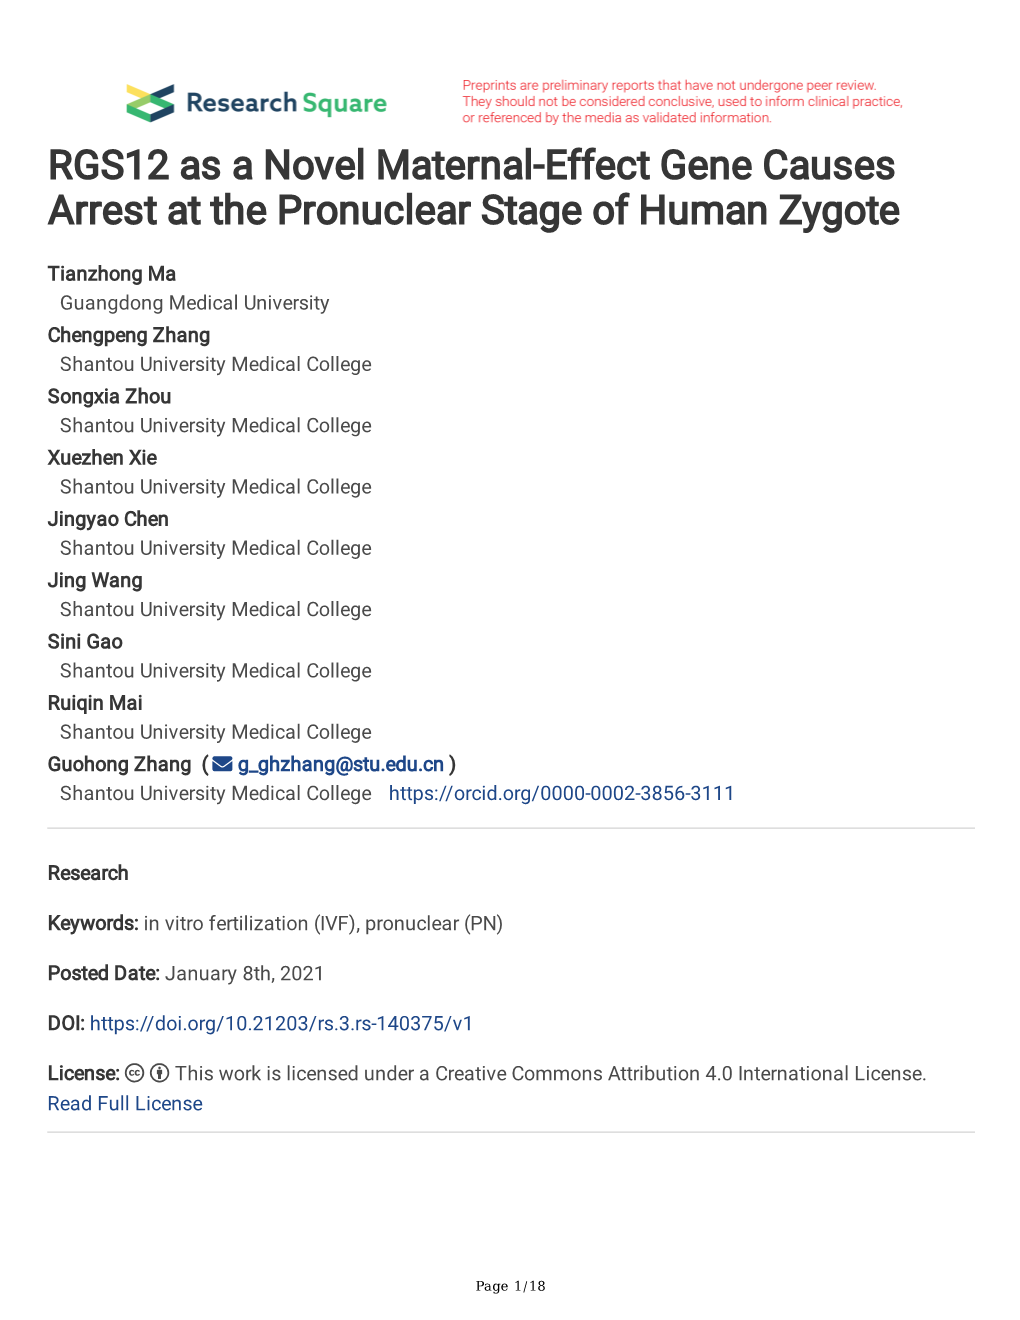 RGS12 As a Novel Maternal-Effect Gene Causes Arrest at the Pronuclear Stage of Human Zygote